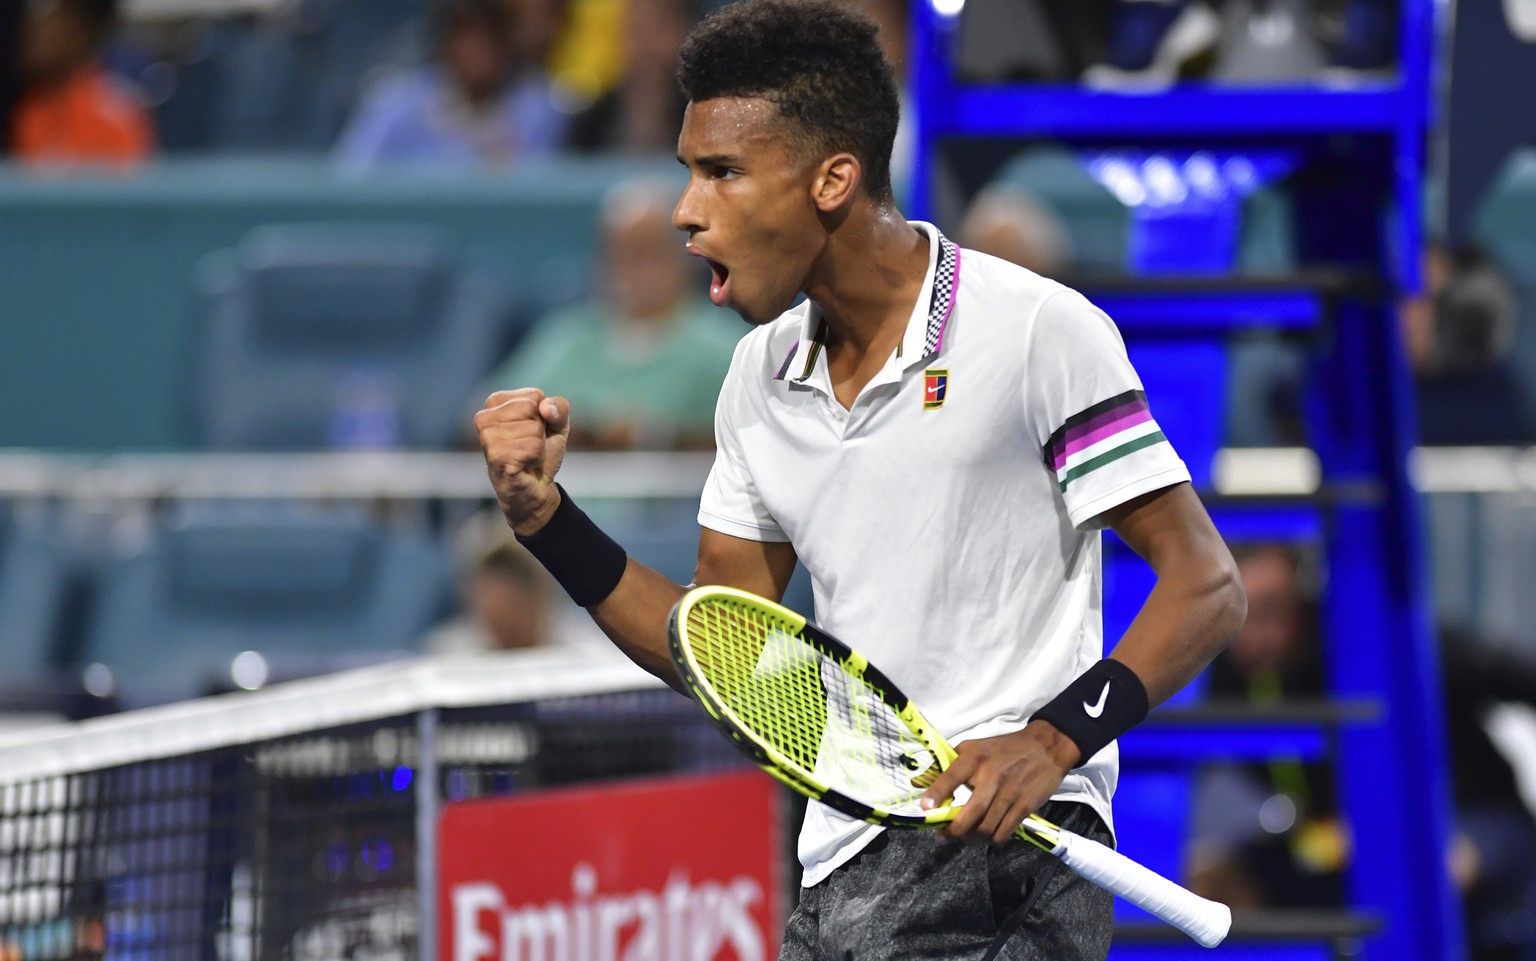 Felix Auger-Aliassime, of Canada, celebrates a point against Borna Coric, of Croatia, during the quarterfinals of the Miami Open tennis tournament Wednesday, March 27, 2019, in Miami Gardens, Fla. (AP ...